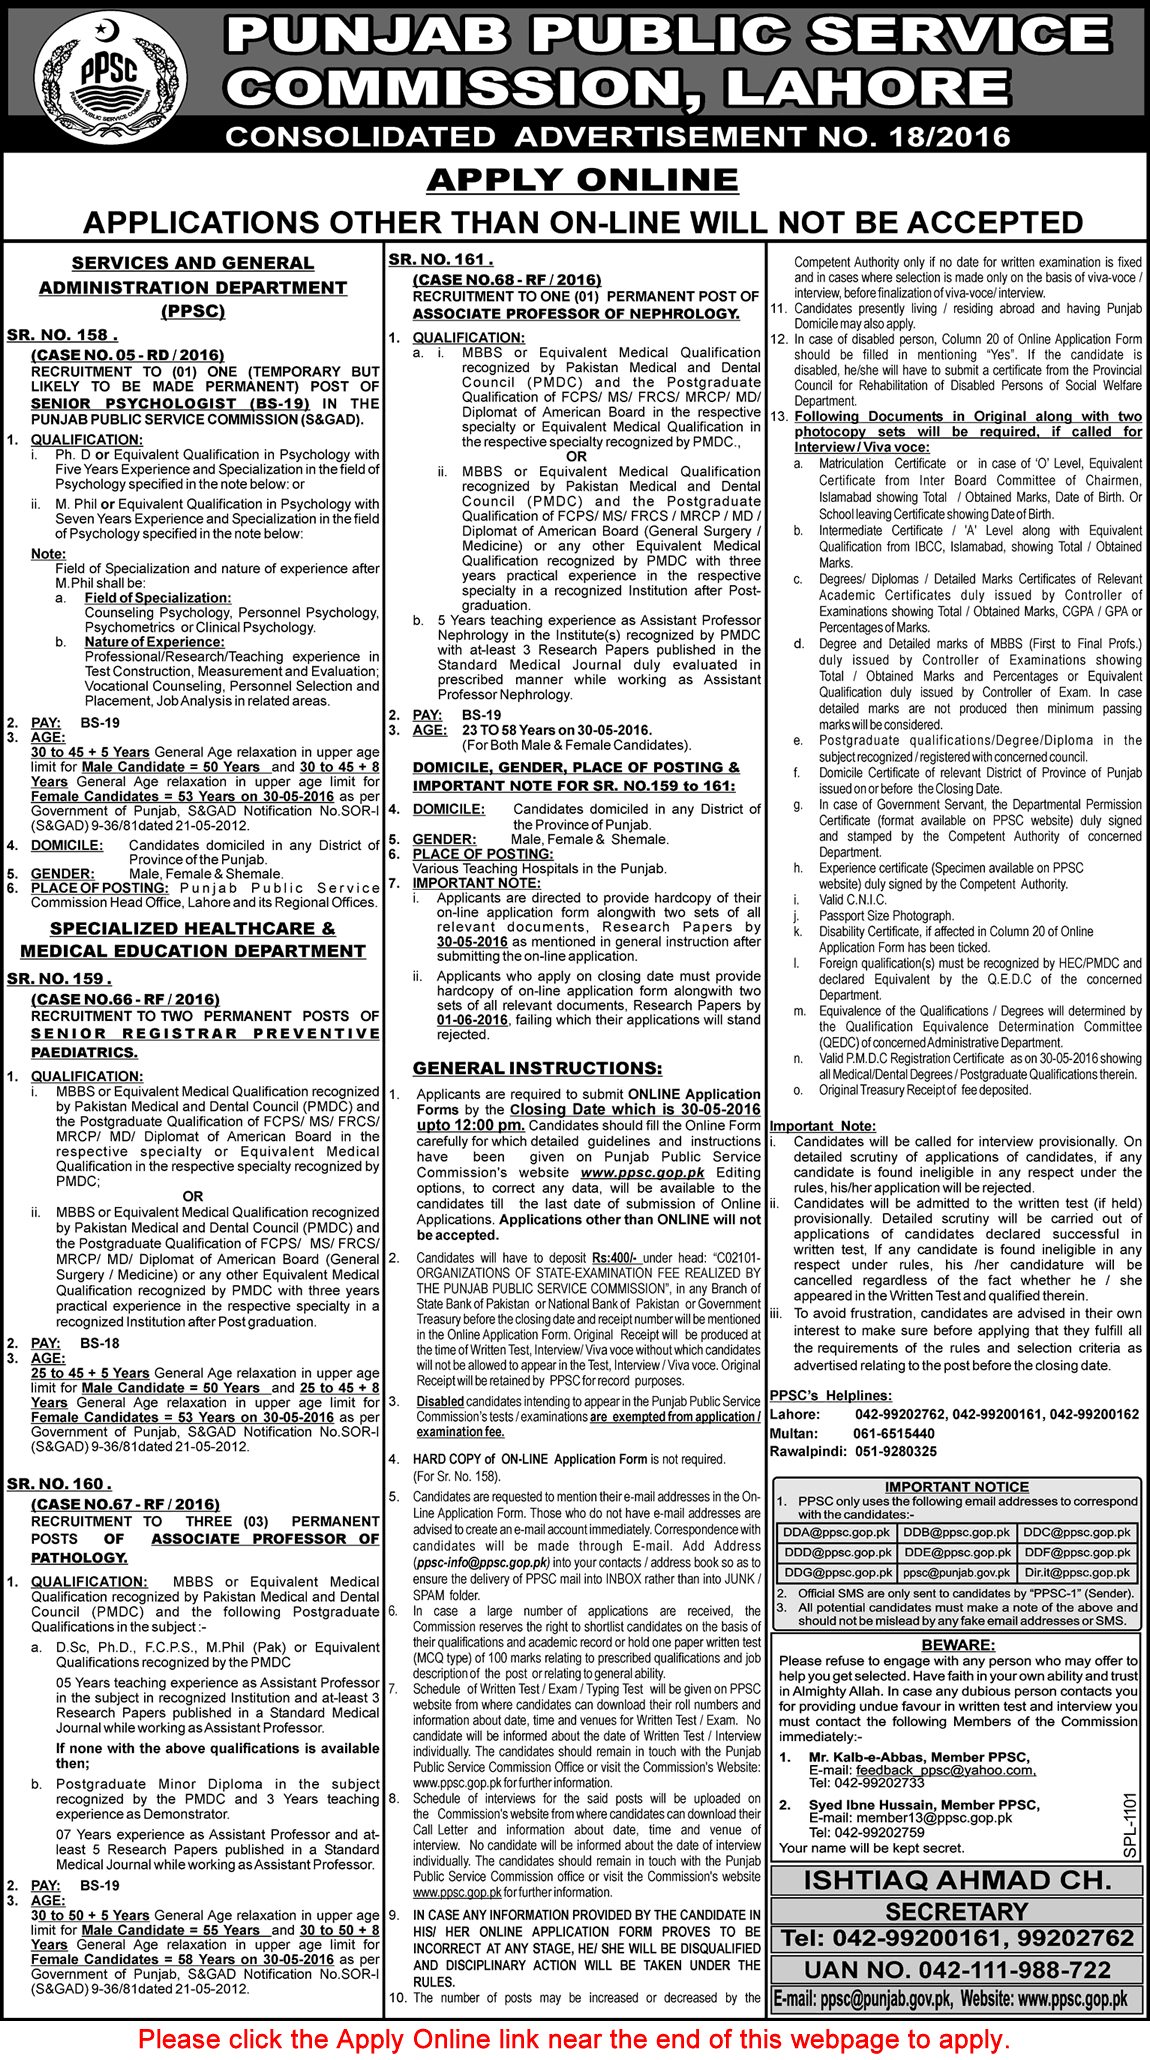 PPSC Jobs May 2016 Consolidated Advertisement No 18/2016 Apply Online Latest